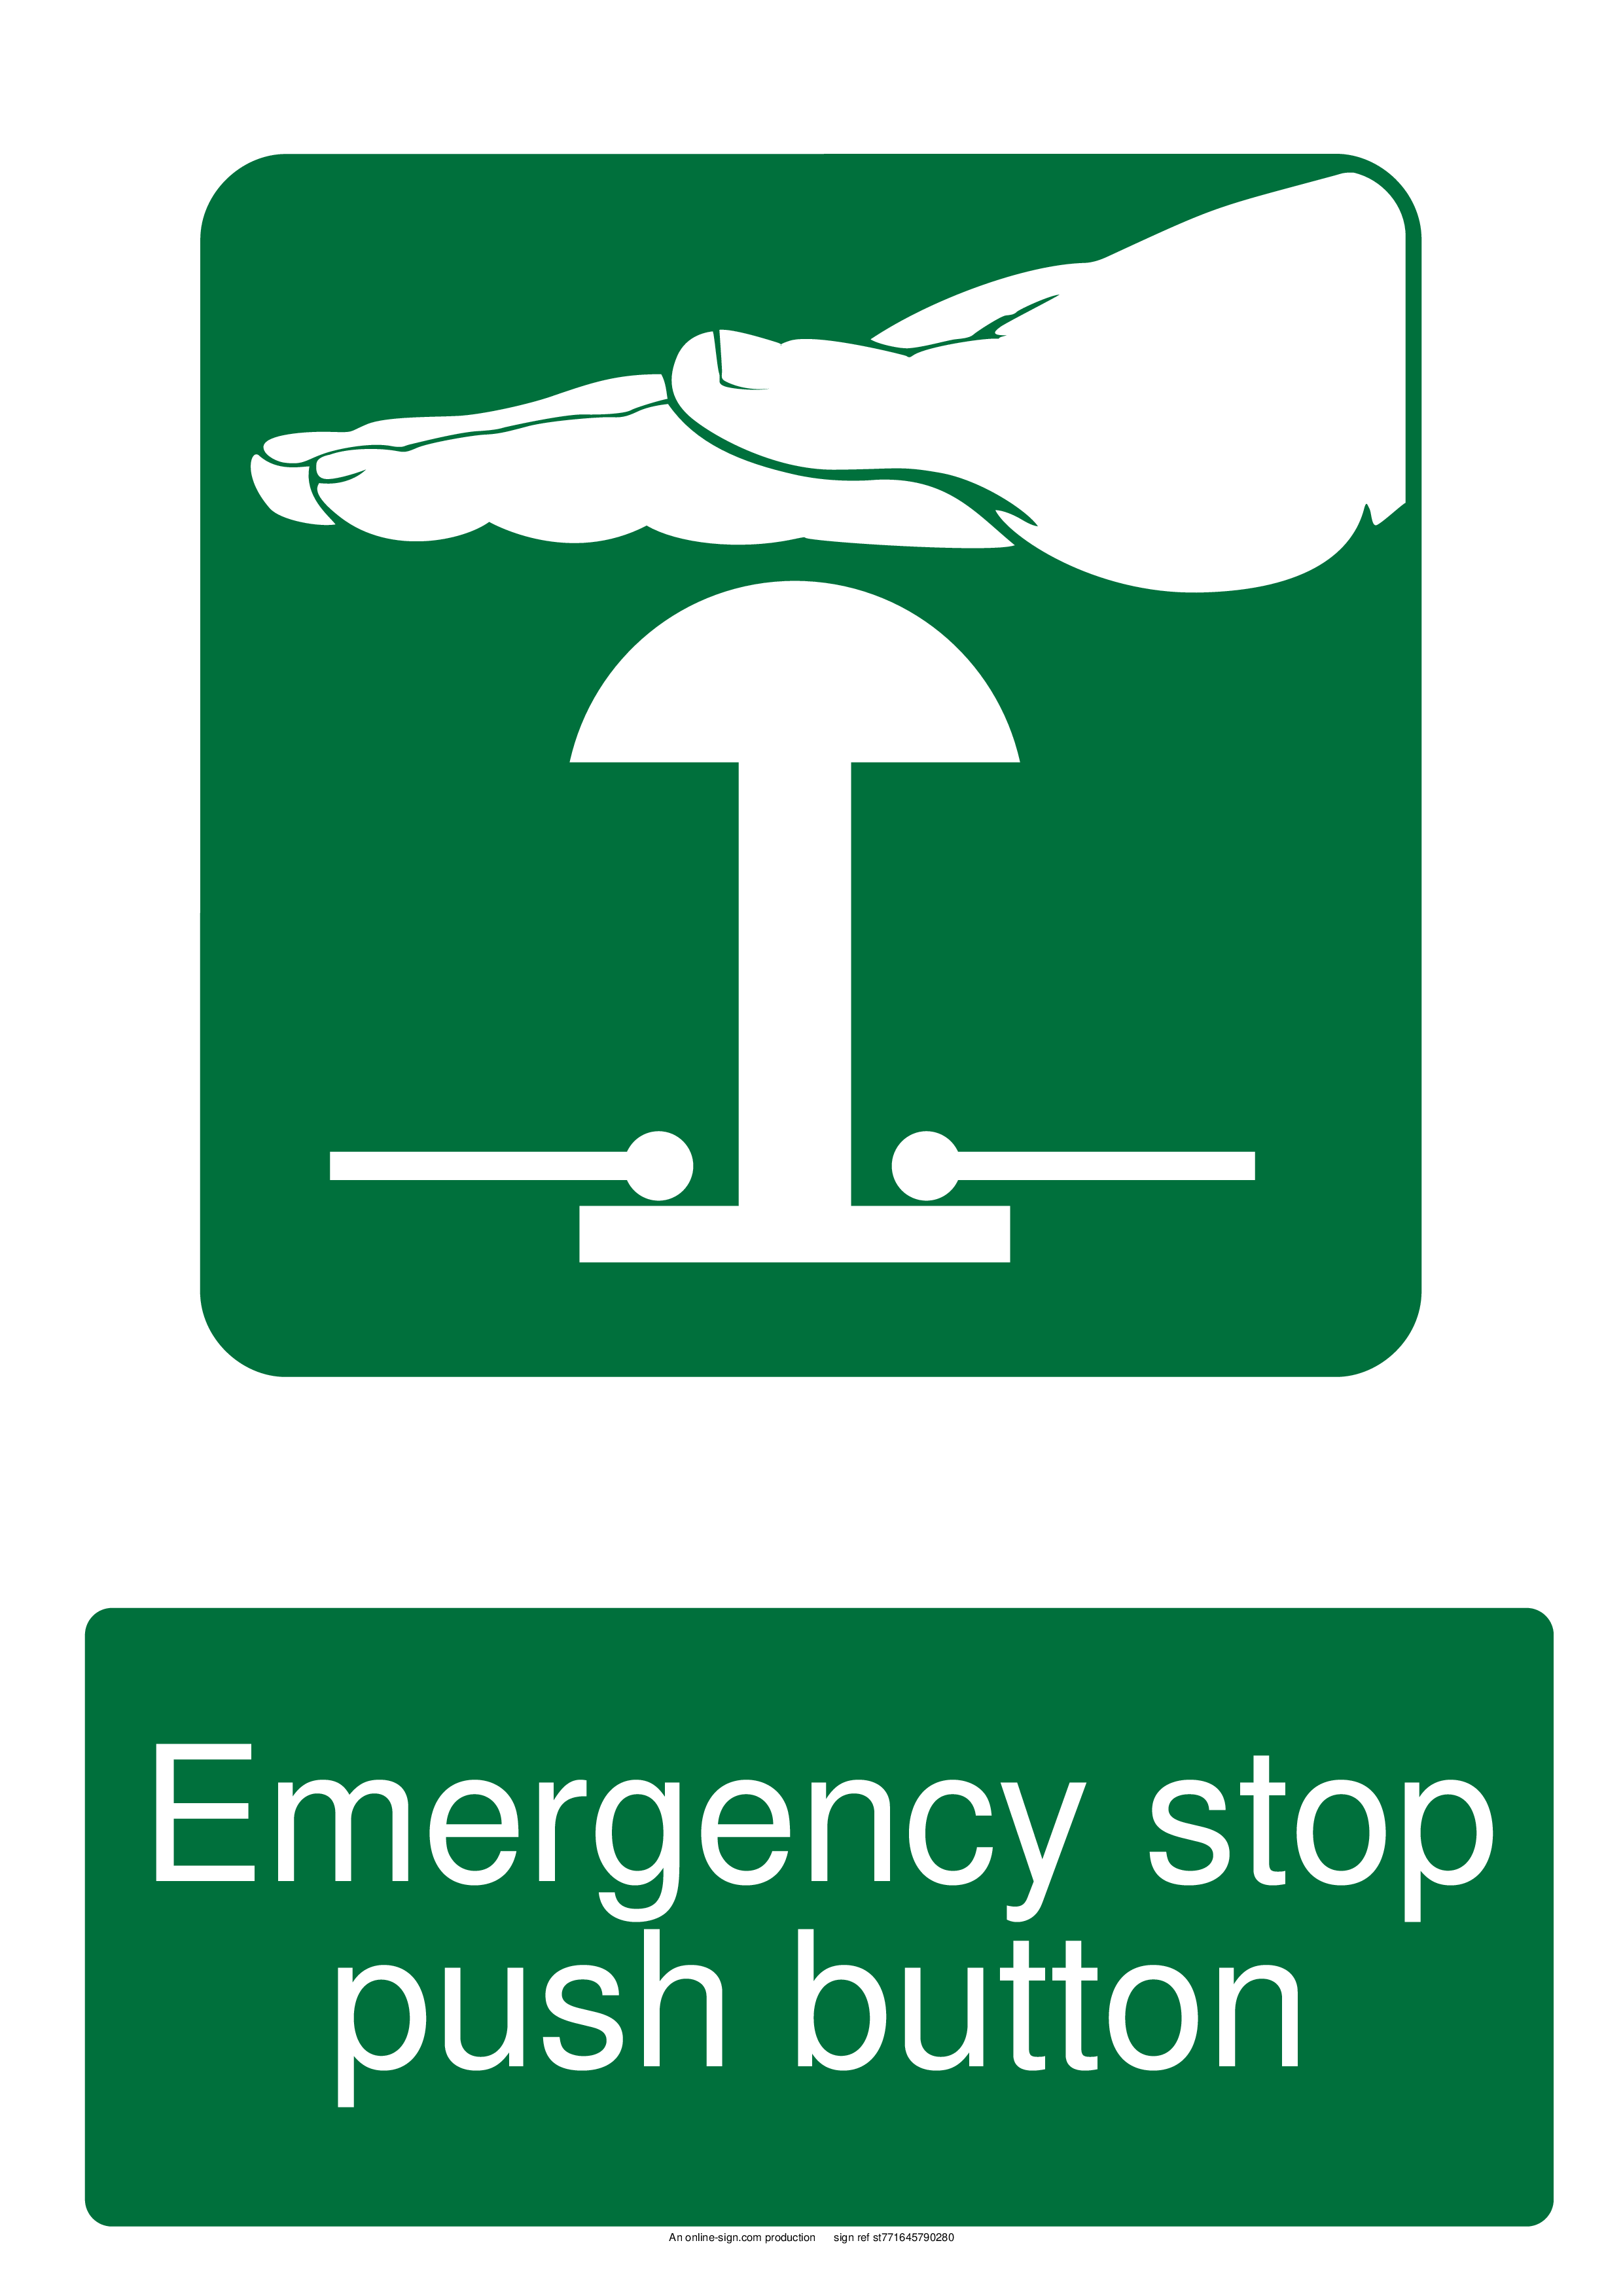 Emergency stop push button sign